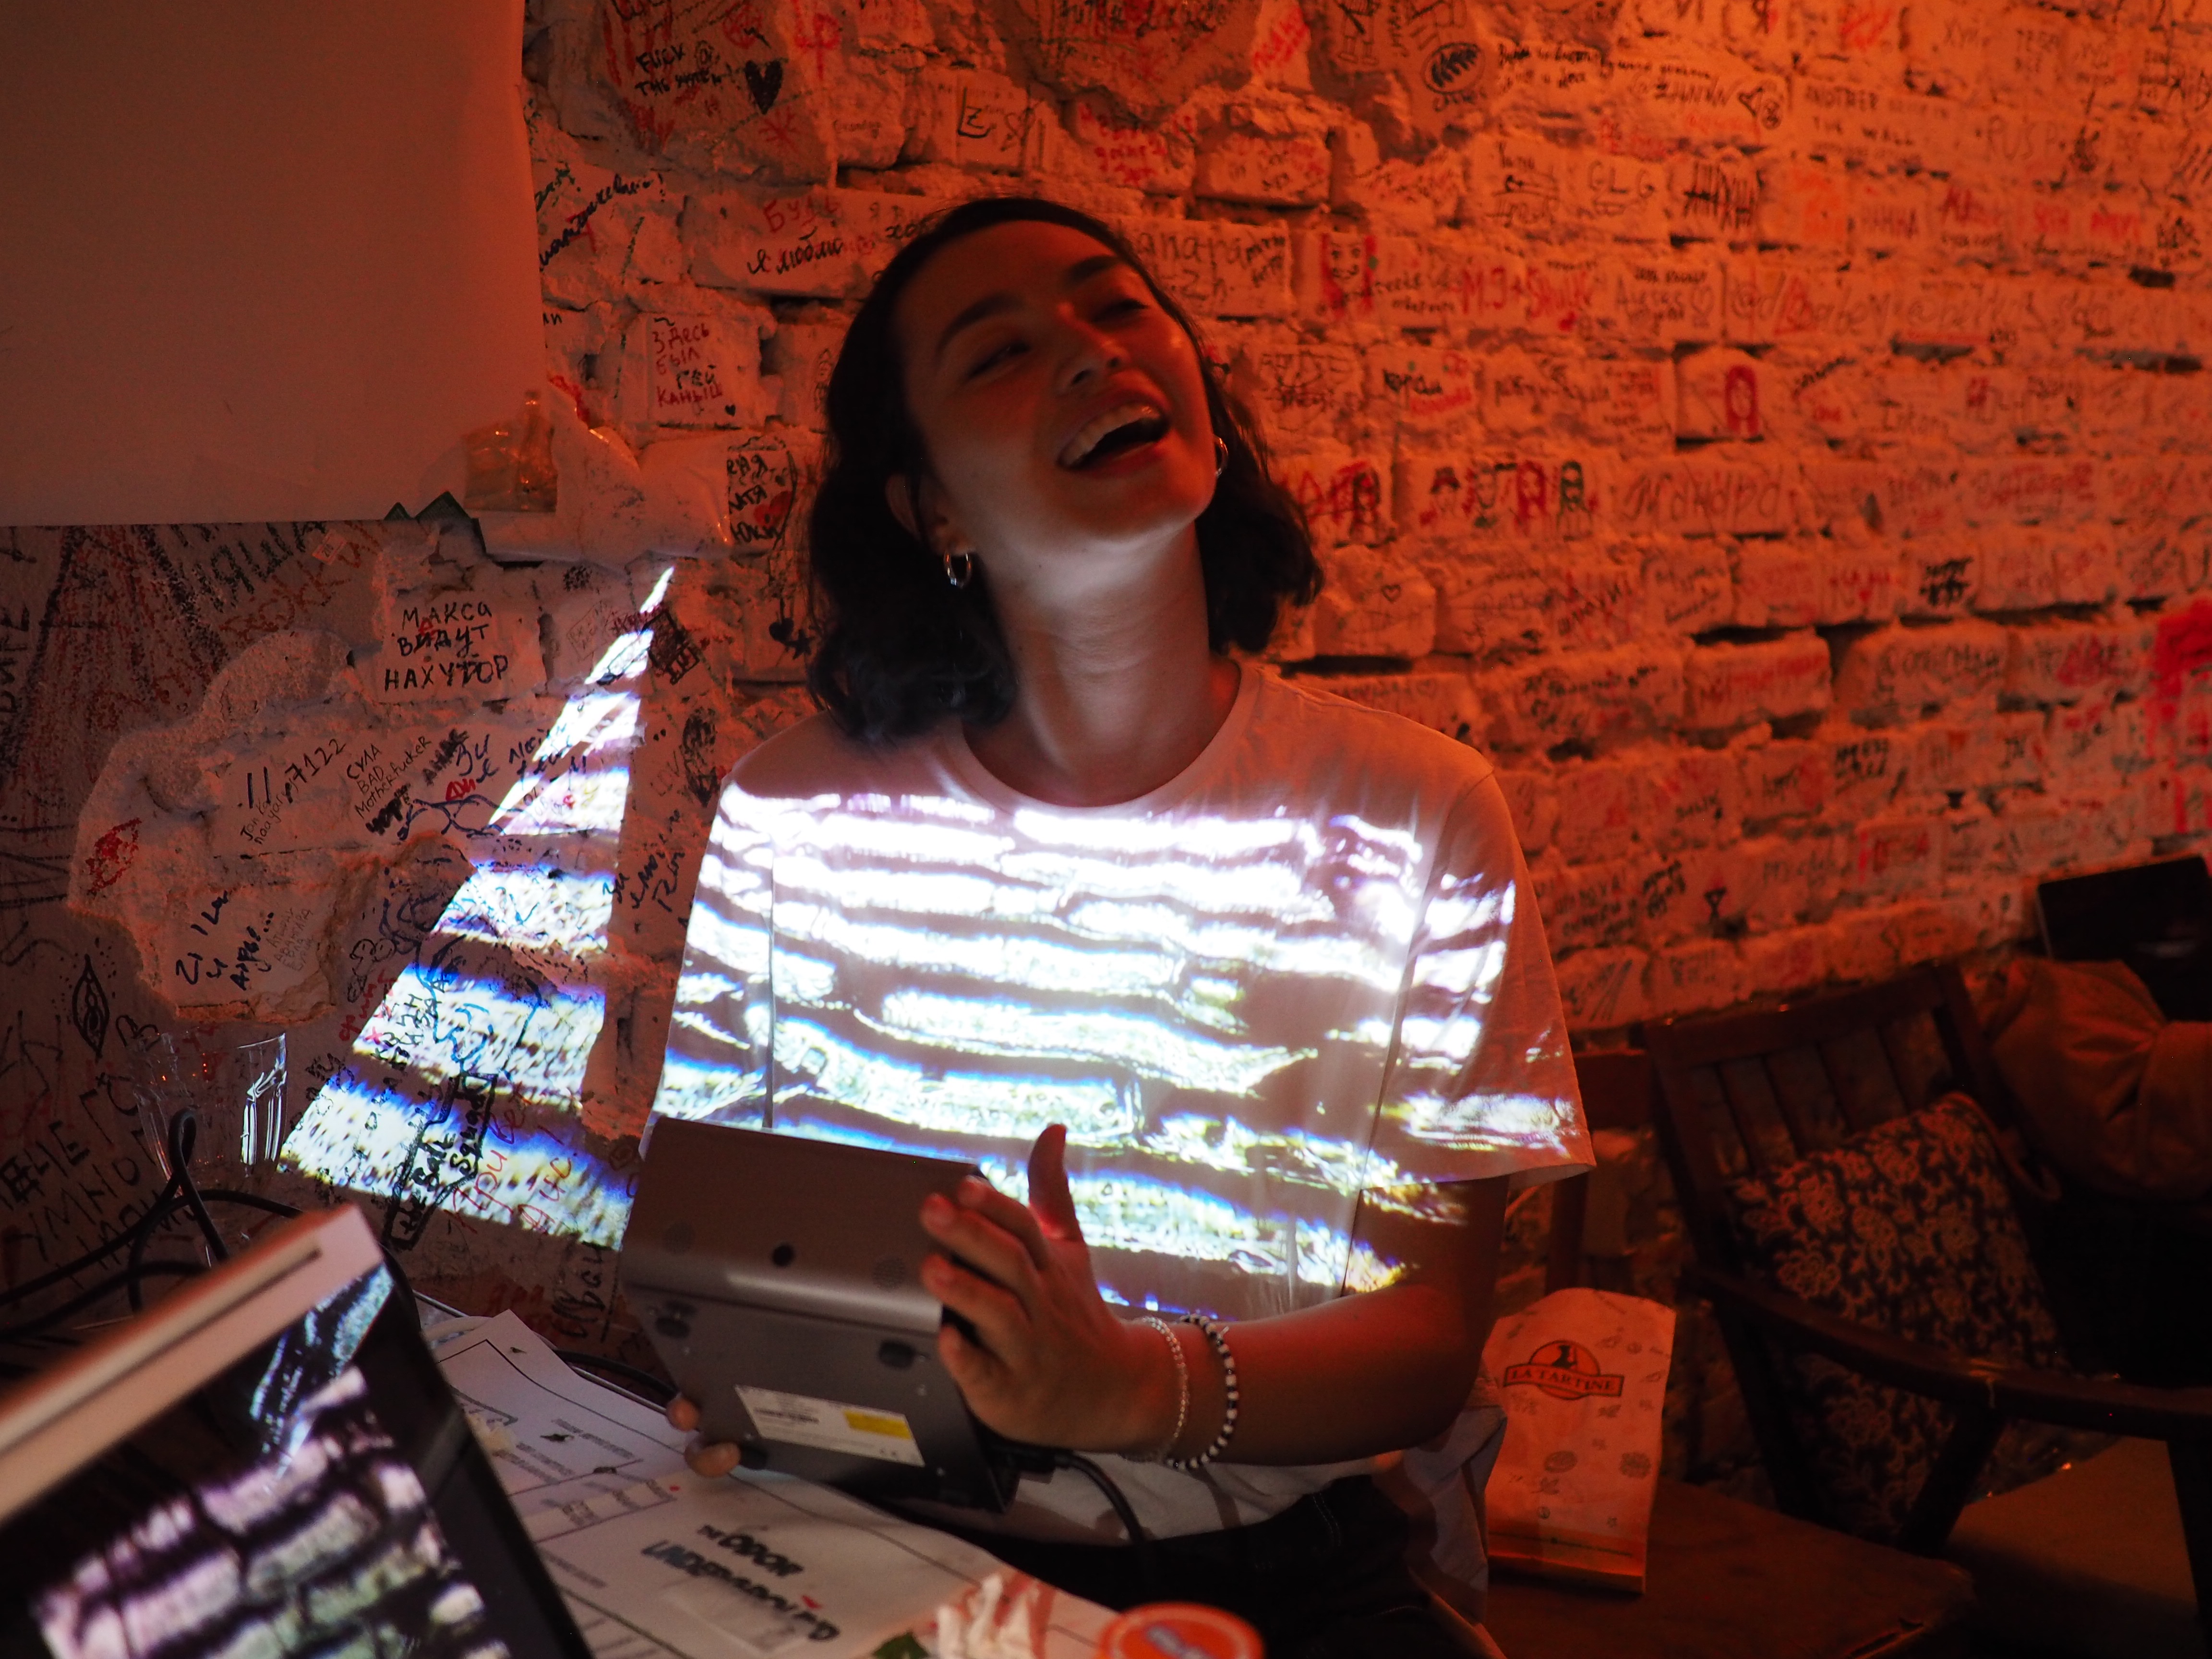 a woman smiling in a dimly lit room while an image of cells is projected onto her shirt